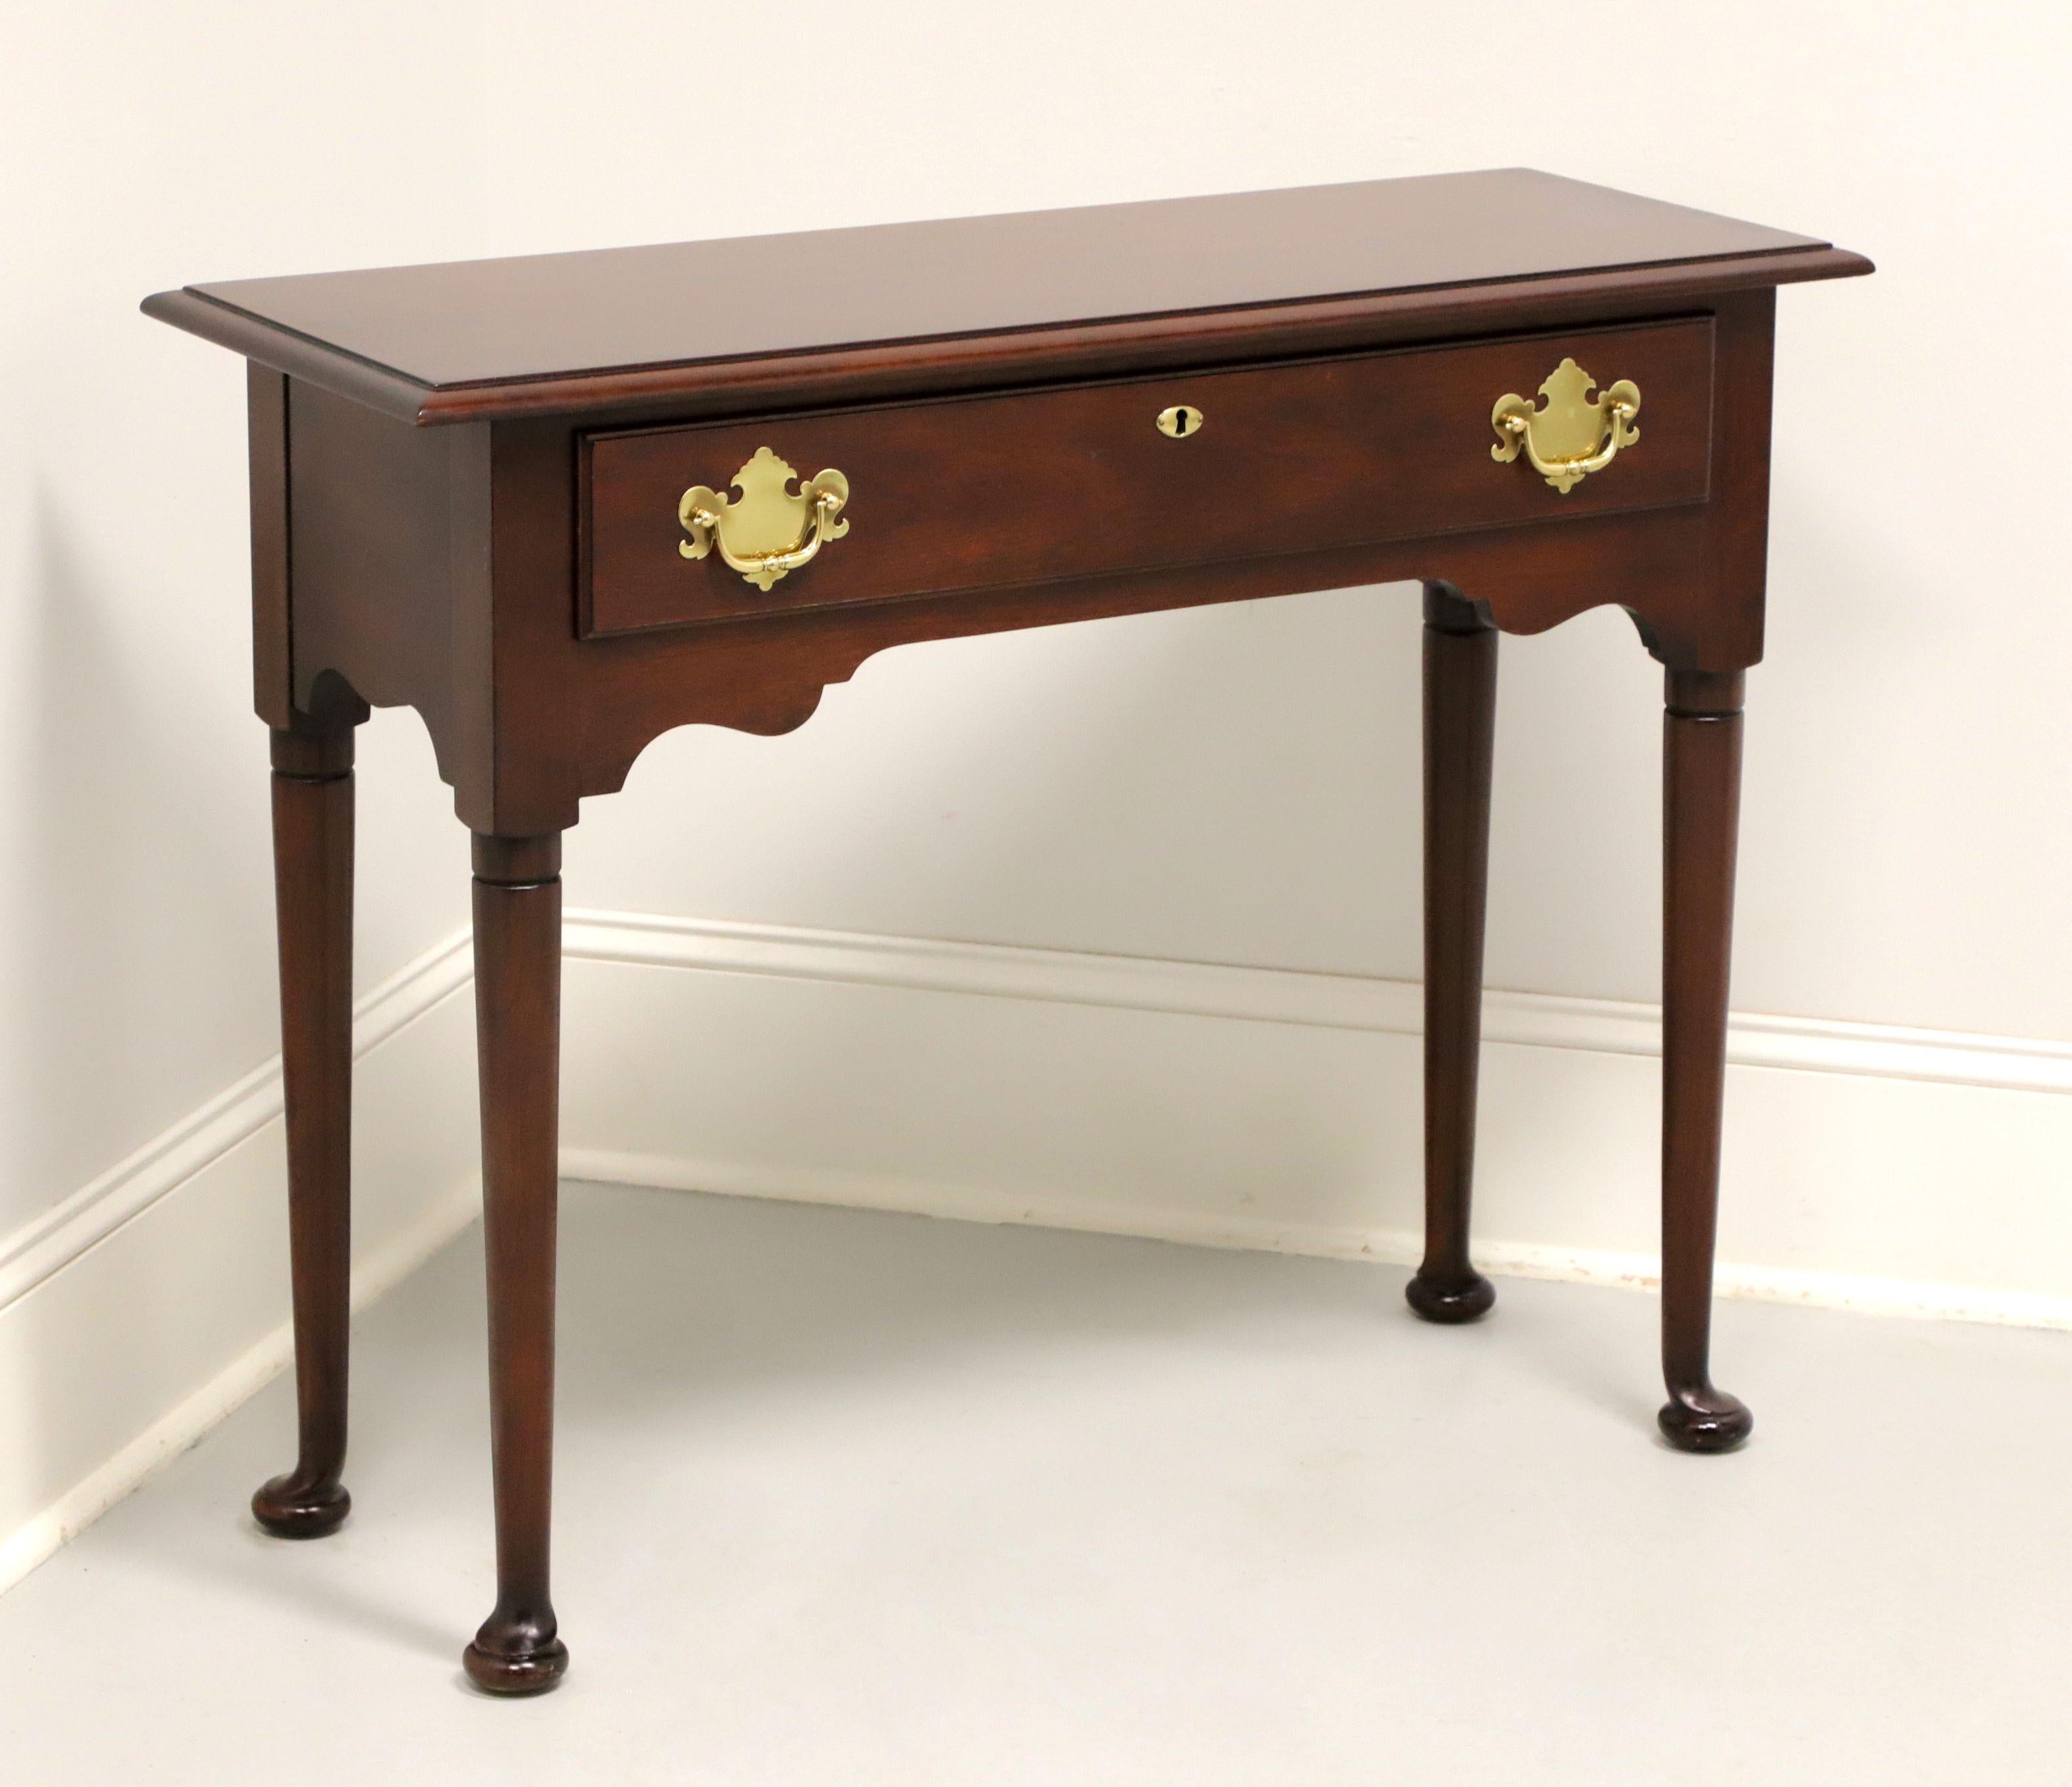 STATTON Trutype Solid Cherry Georgian Console Table 6